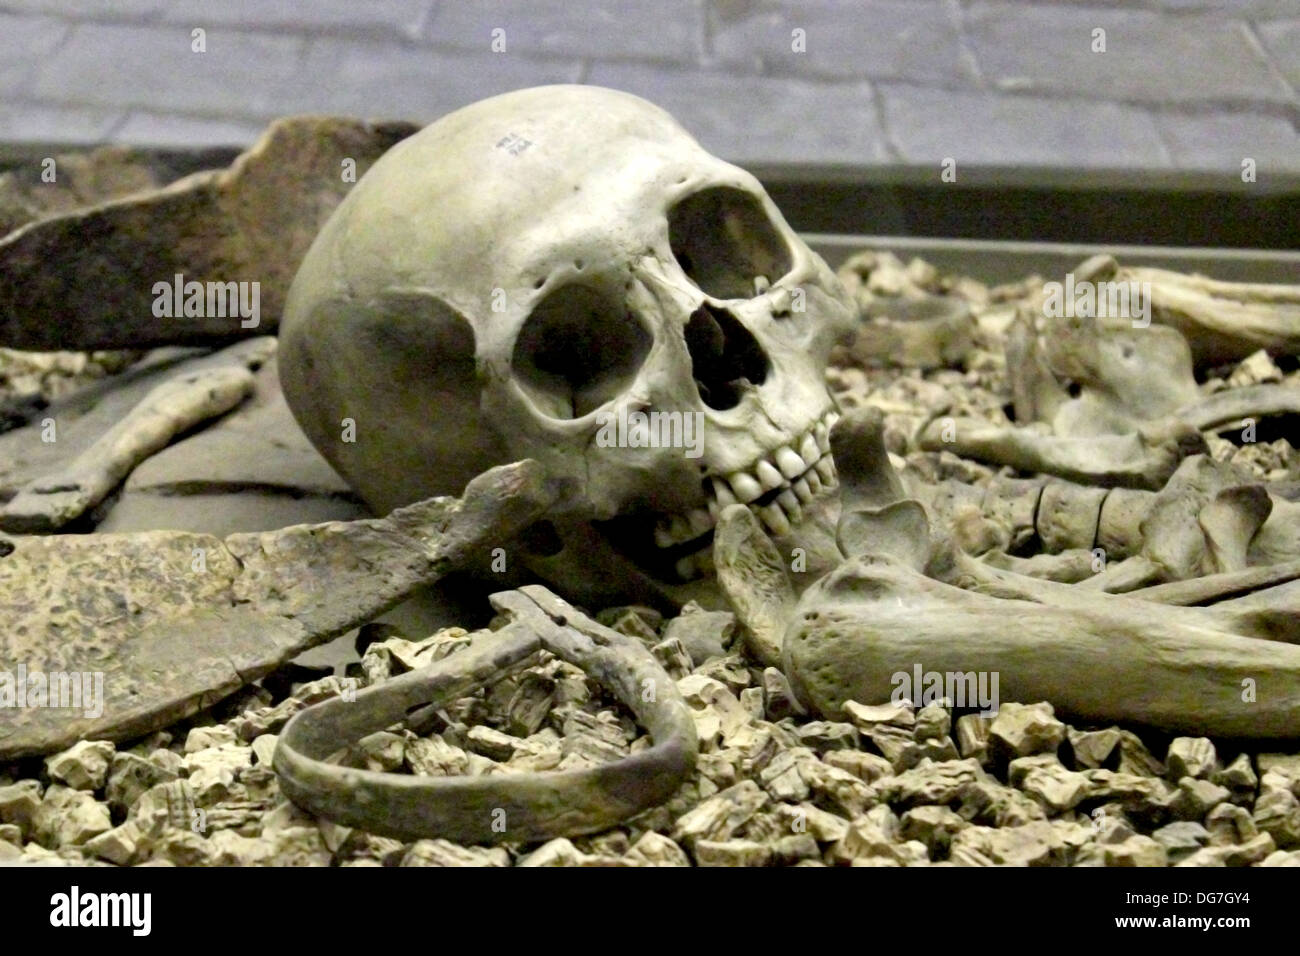 Exhibit of ancient Central American burial display Stock Photo